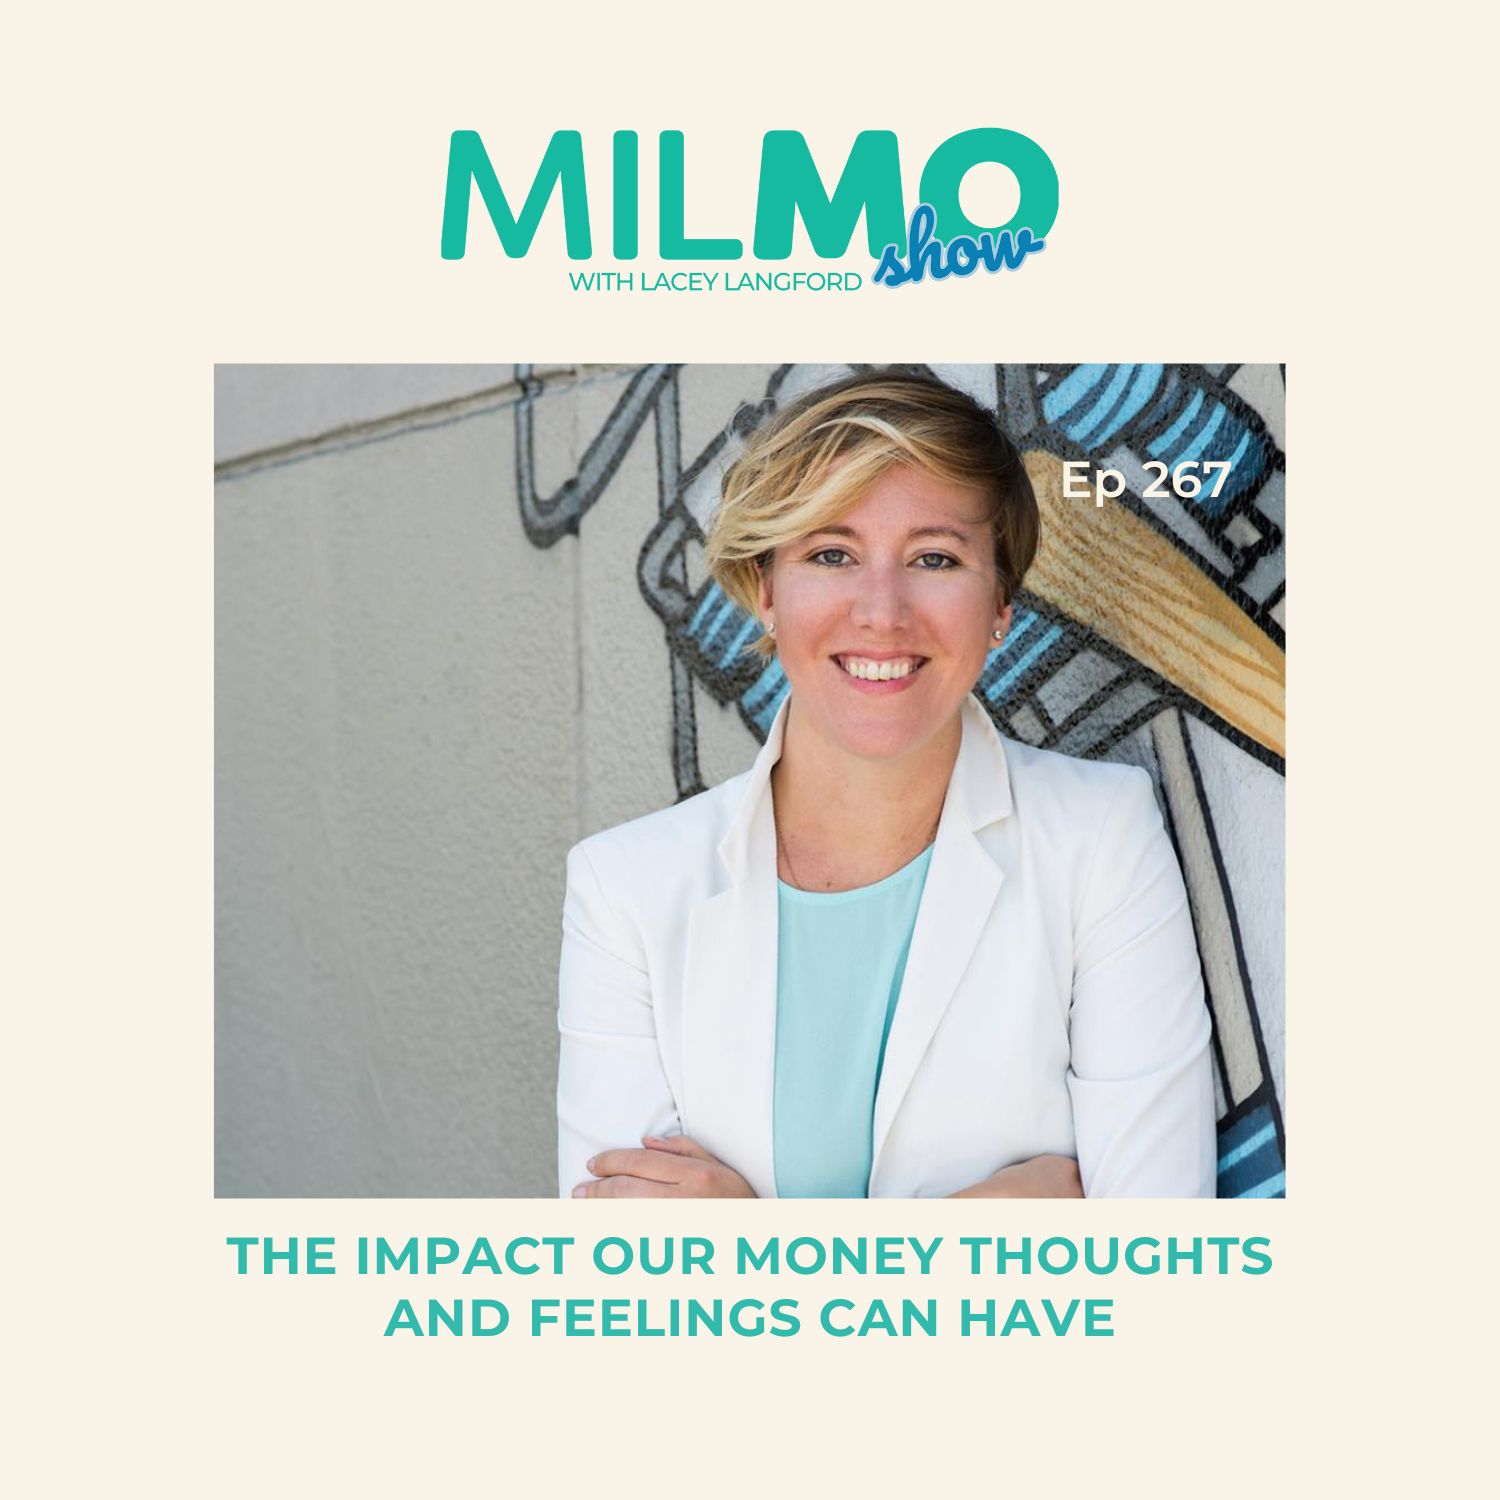 In this episode, Dr. Meghaan Lurtz shares how we can bring awareness to our money thoughts and feelings to reach our financial goals.